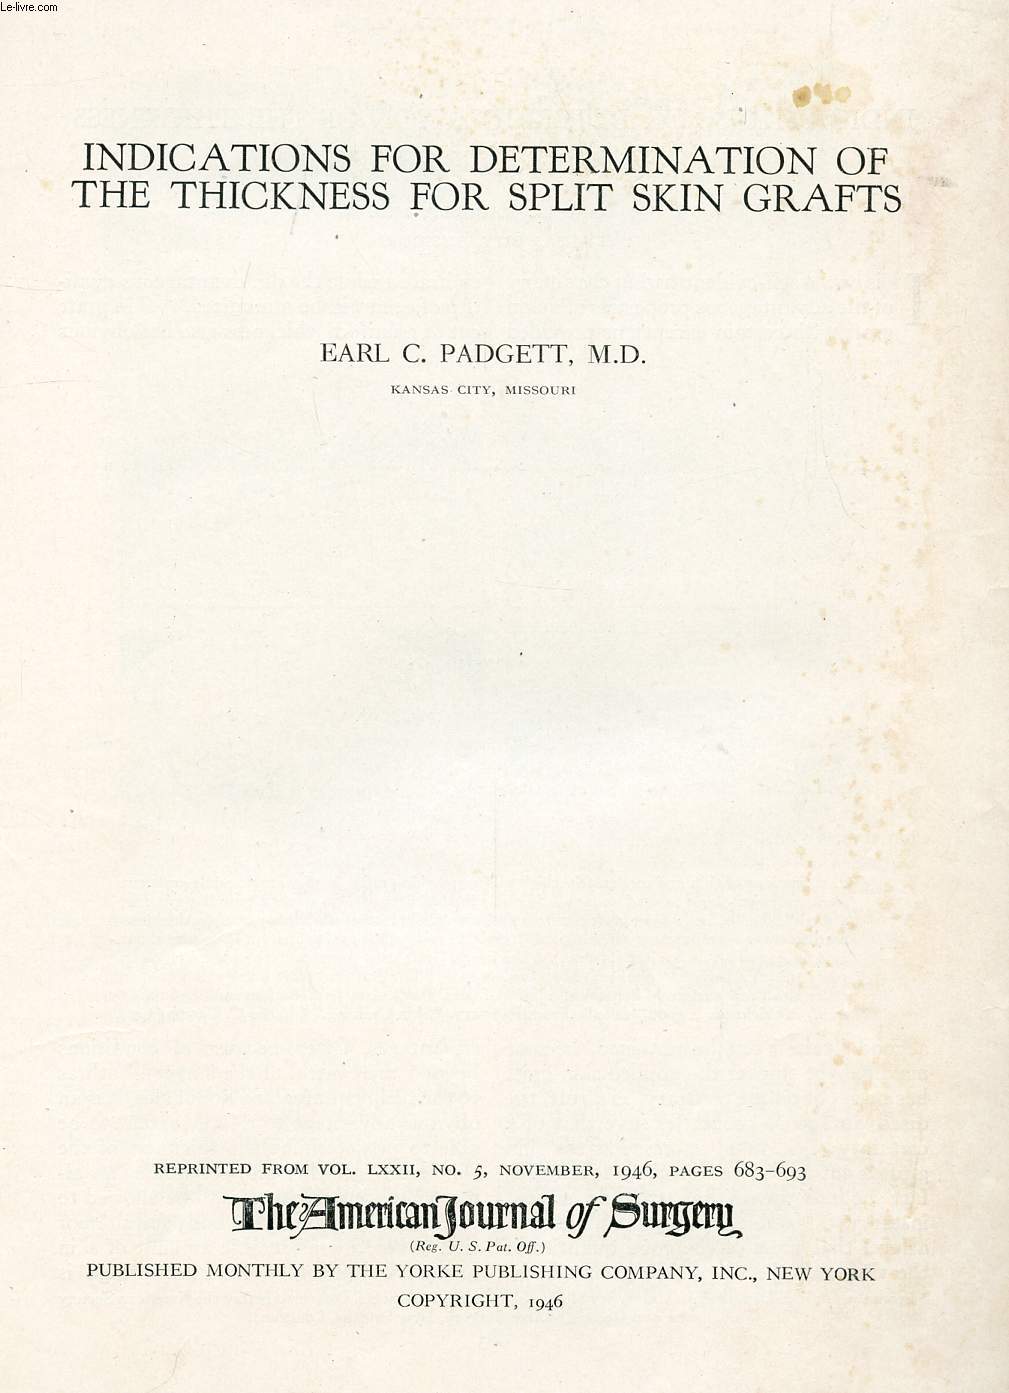 INDICATIONS FOR DETERMINATION OF THE THICKNESS FOR SPLIT SKIN GRAFTS (REPRINT)